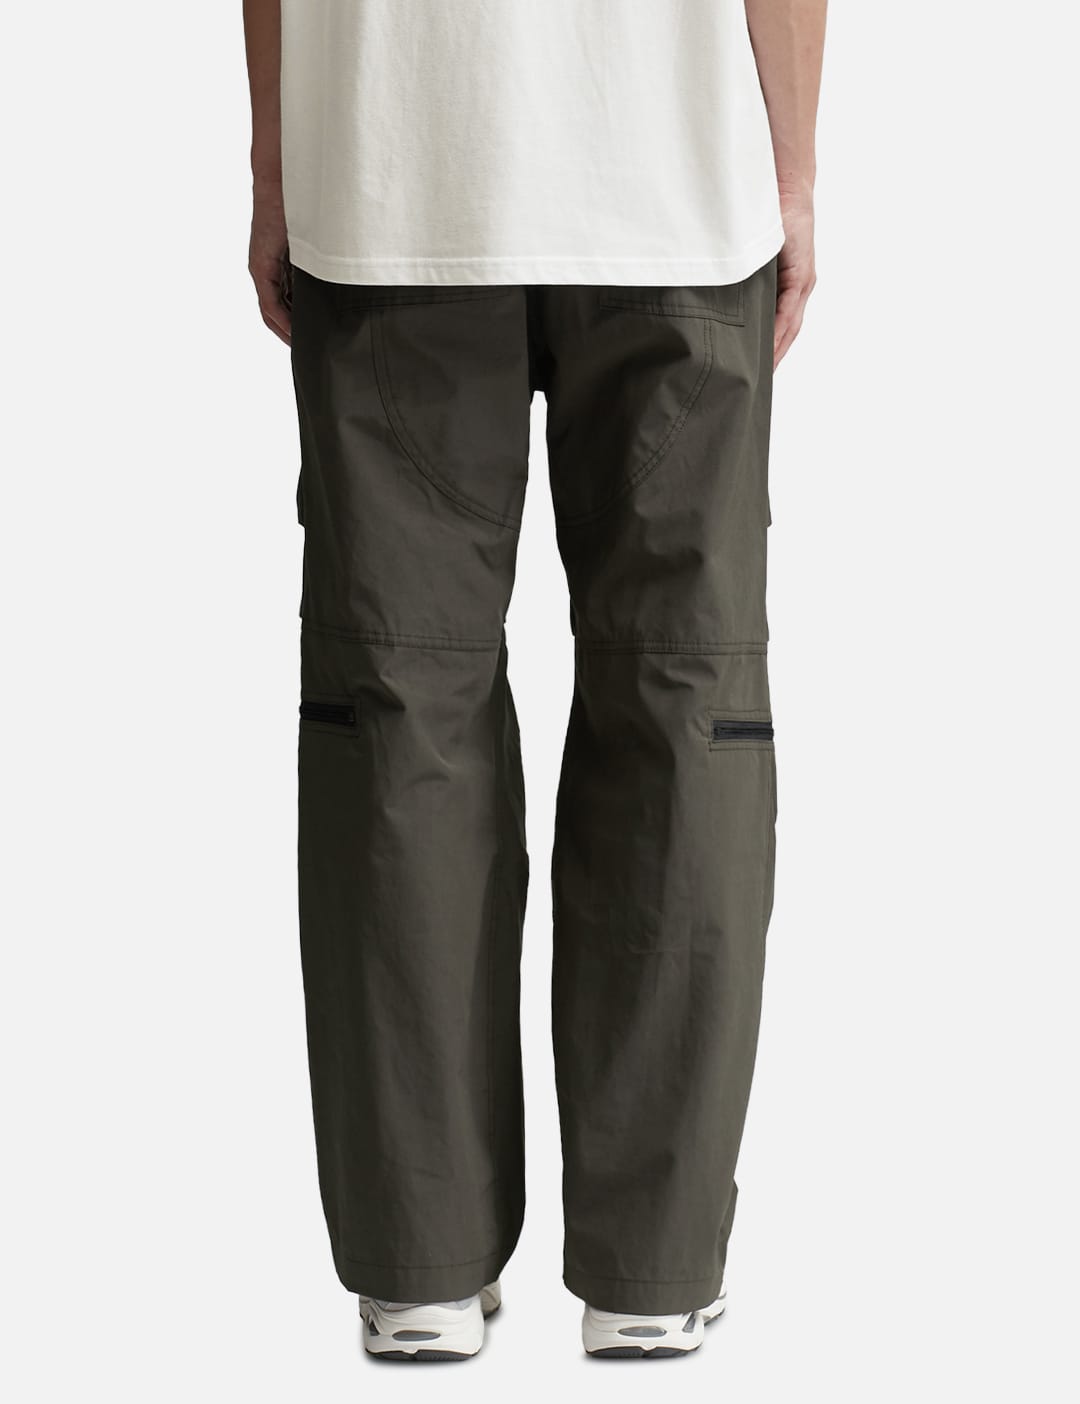 GRAILZ - AFV Cargo Pants | HBX - Globally Curated Fashion and